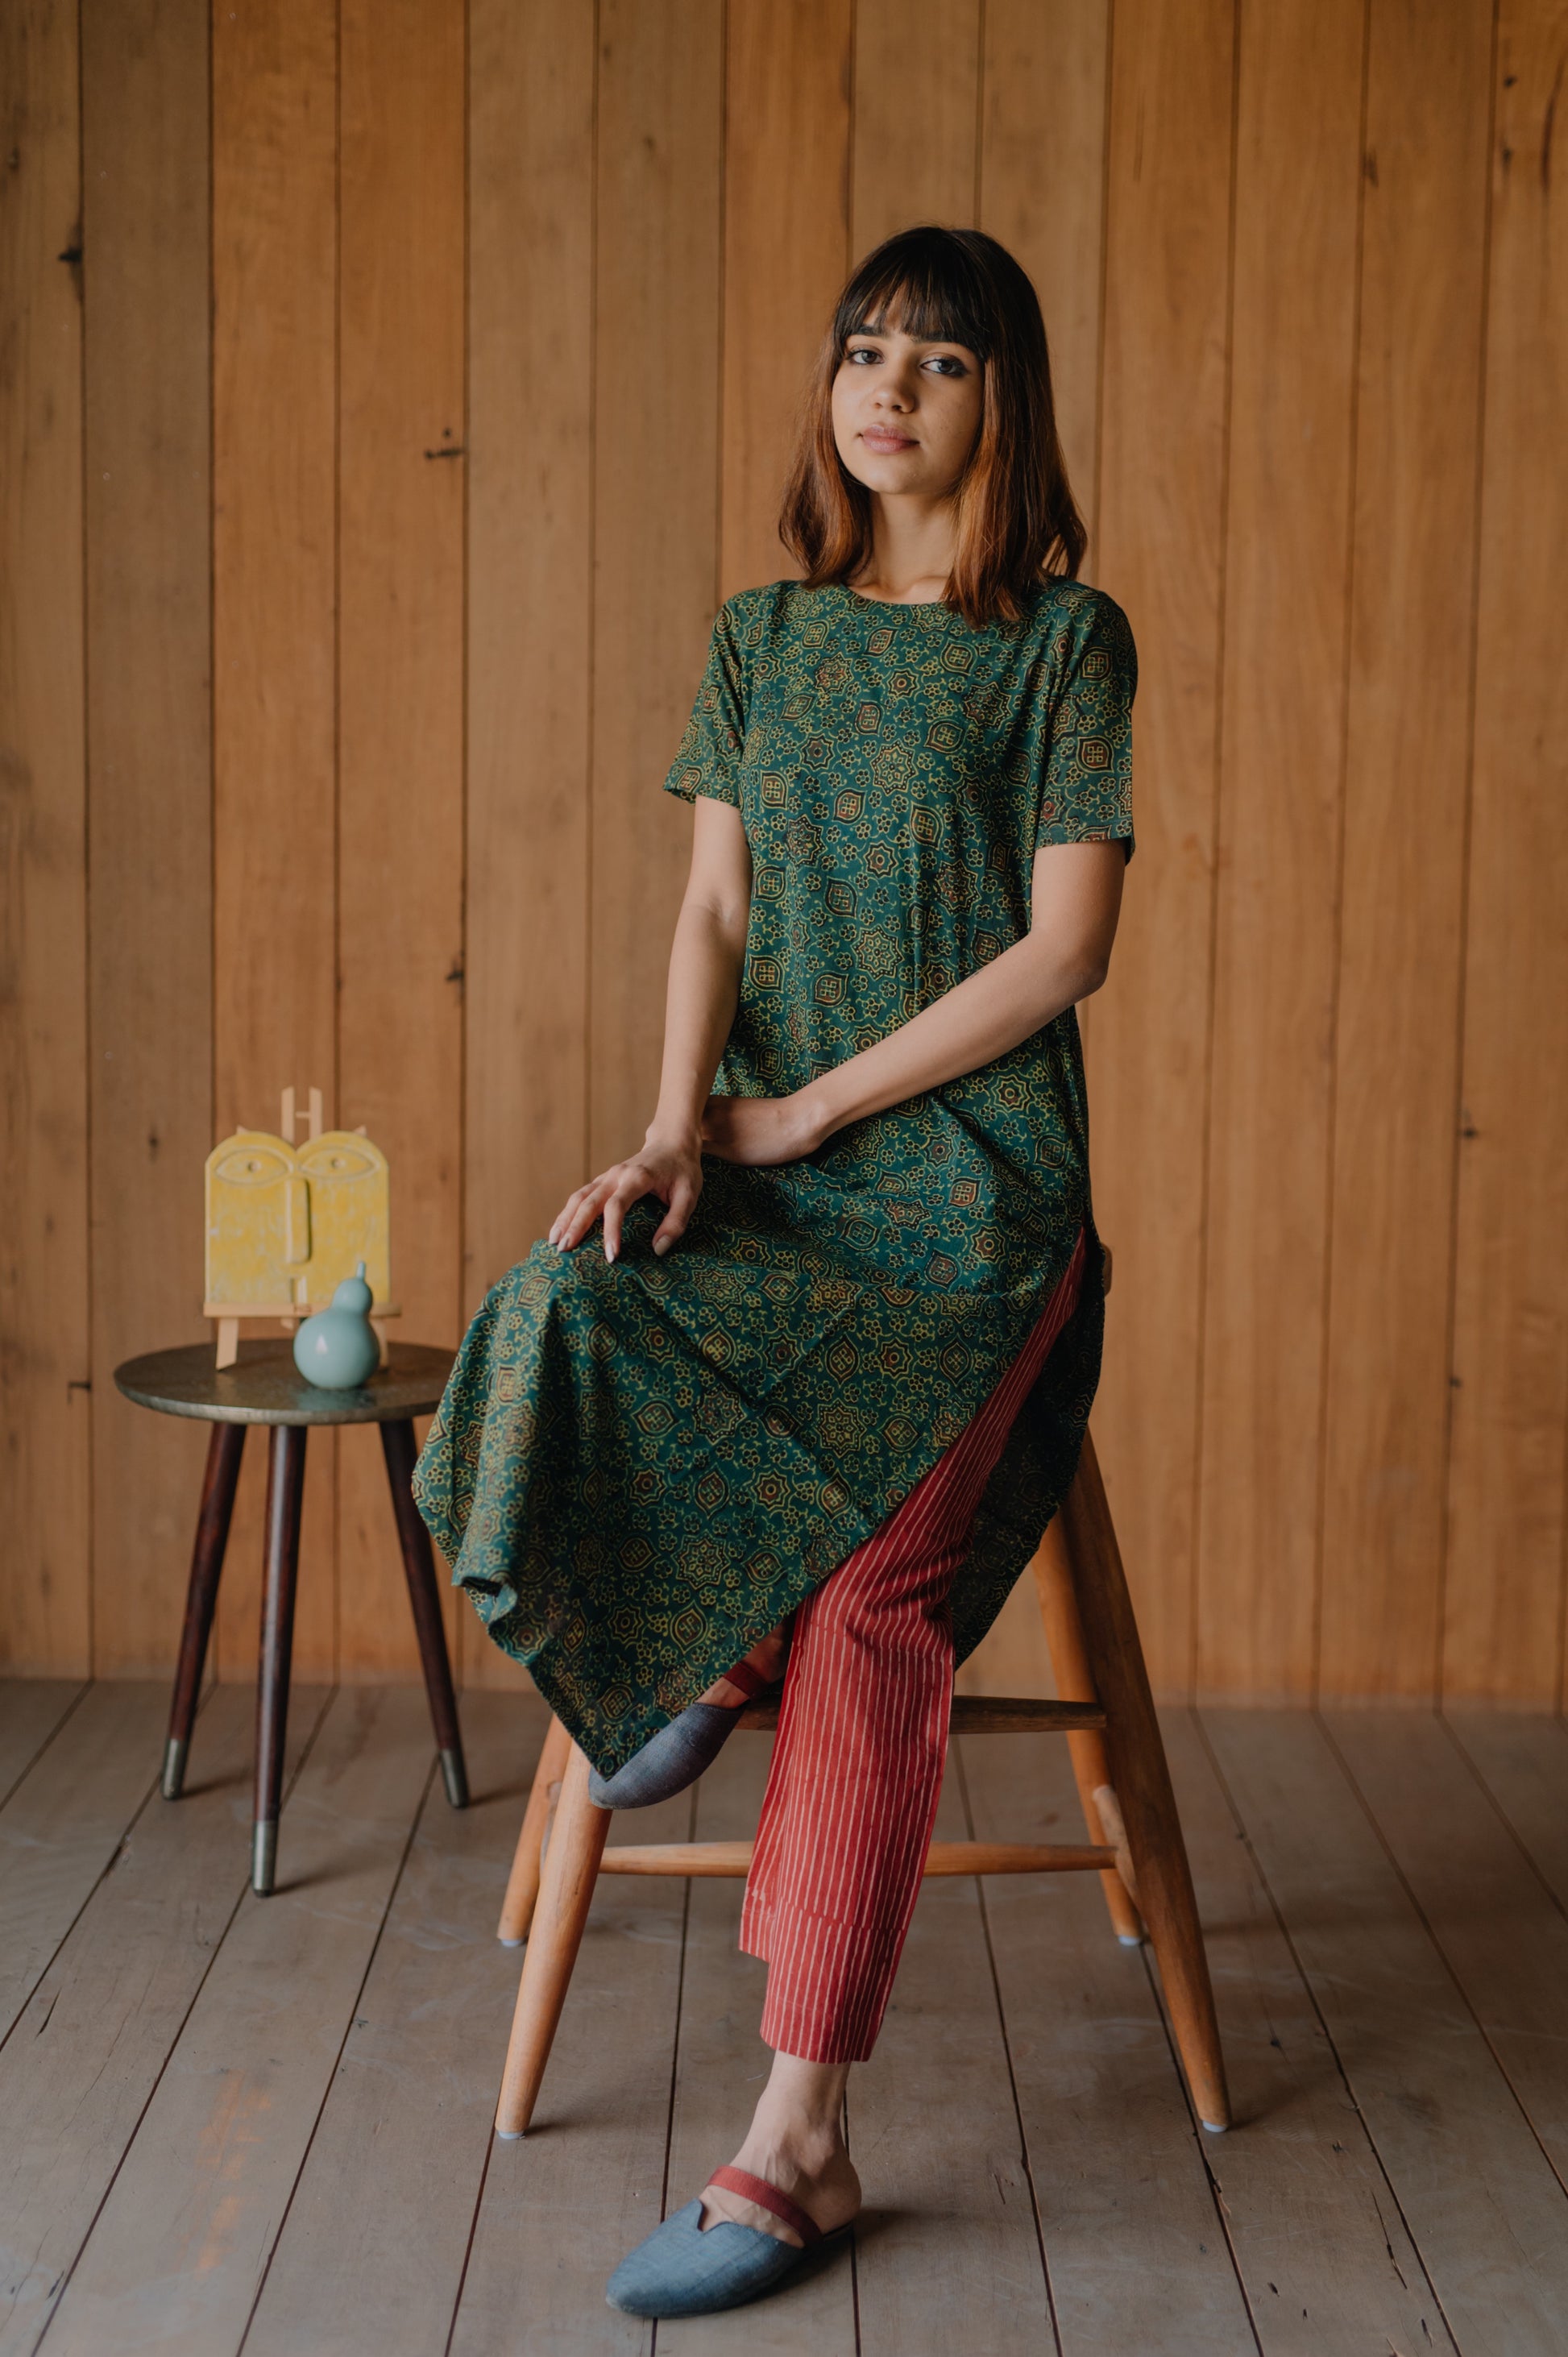 Step into style and comfort with our Natural Hues Pant Set. The Ajrakh hand block print on the green kurta perfectly complements the stripes madder dyed pants, delivering a unique and eye-catching look. The elasticated waistband and breathable fabric make this set perfect for everyday wear.